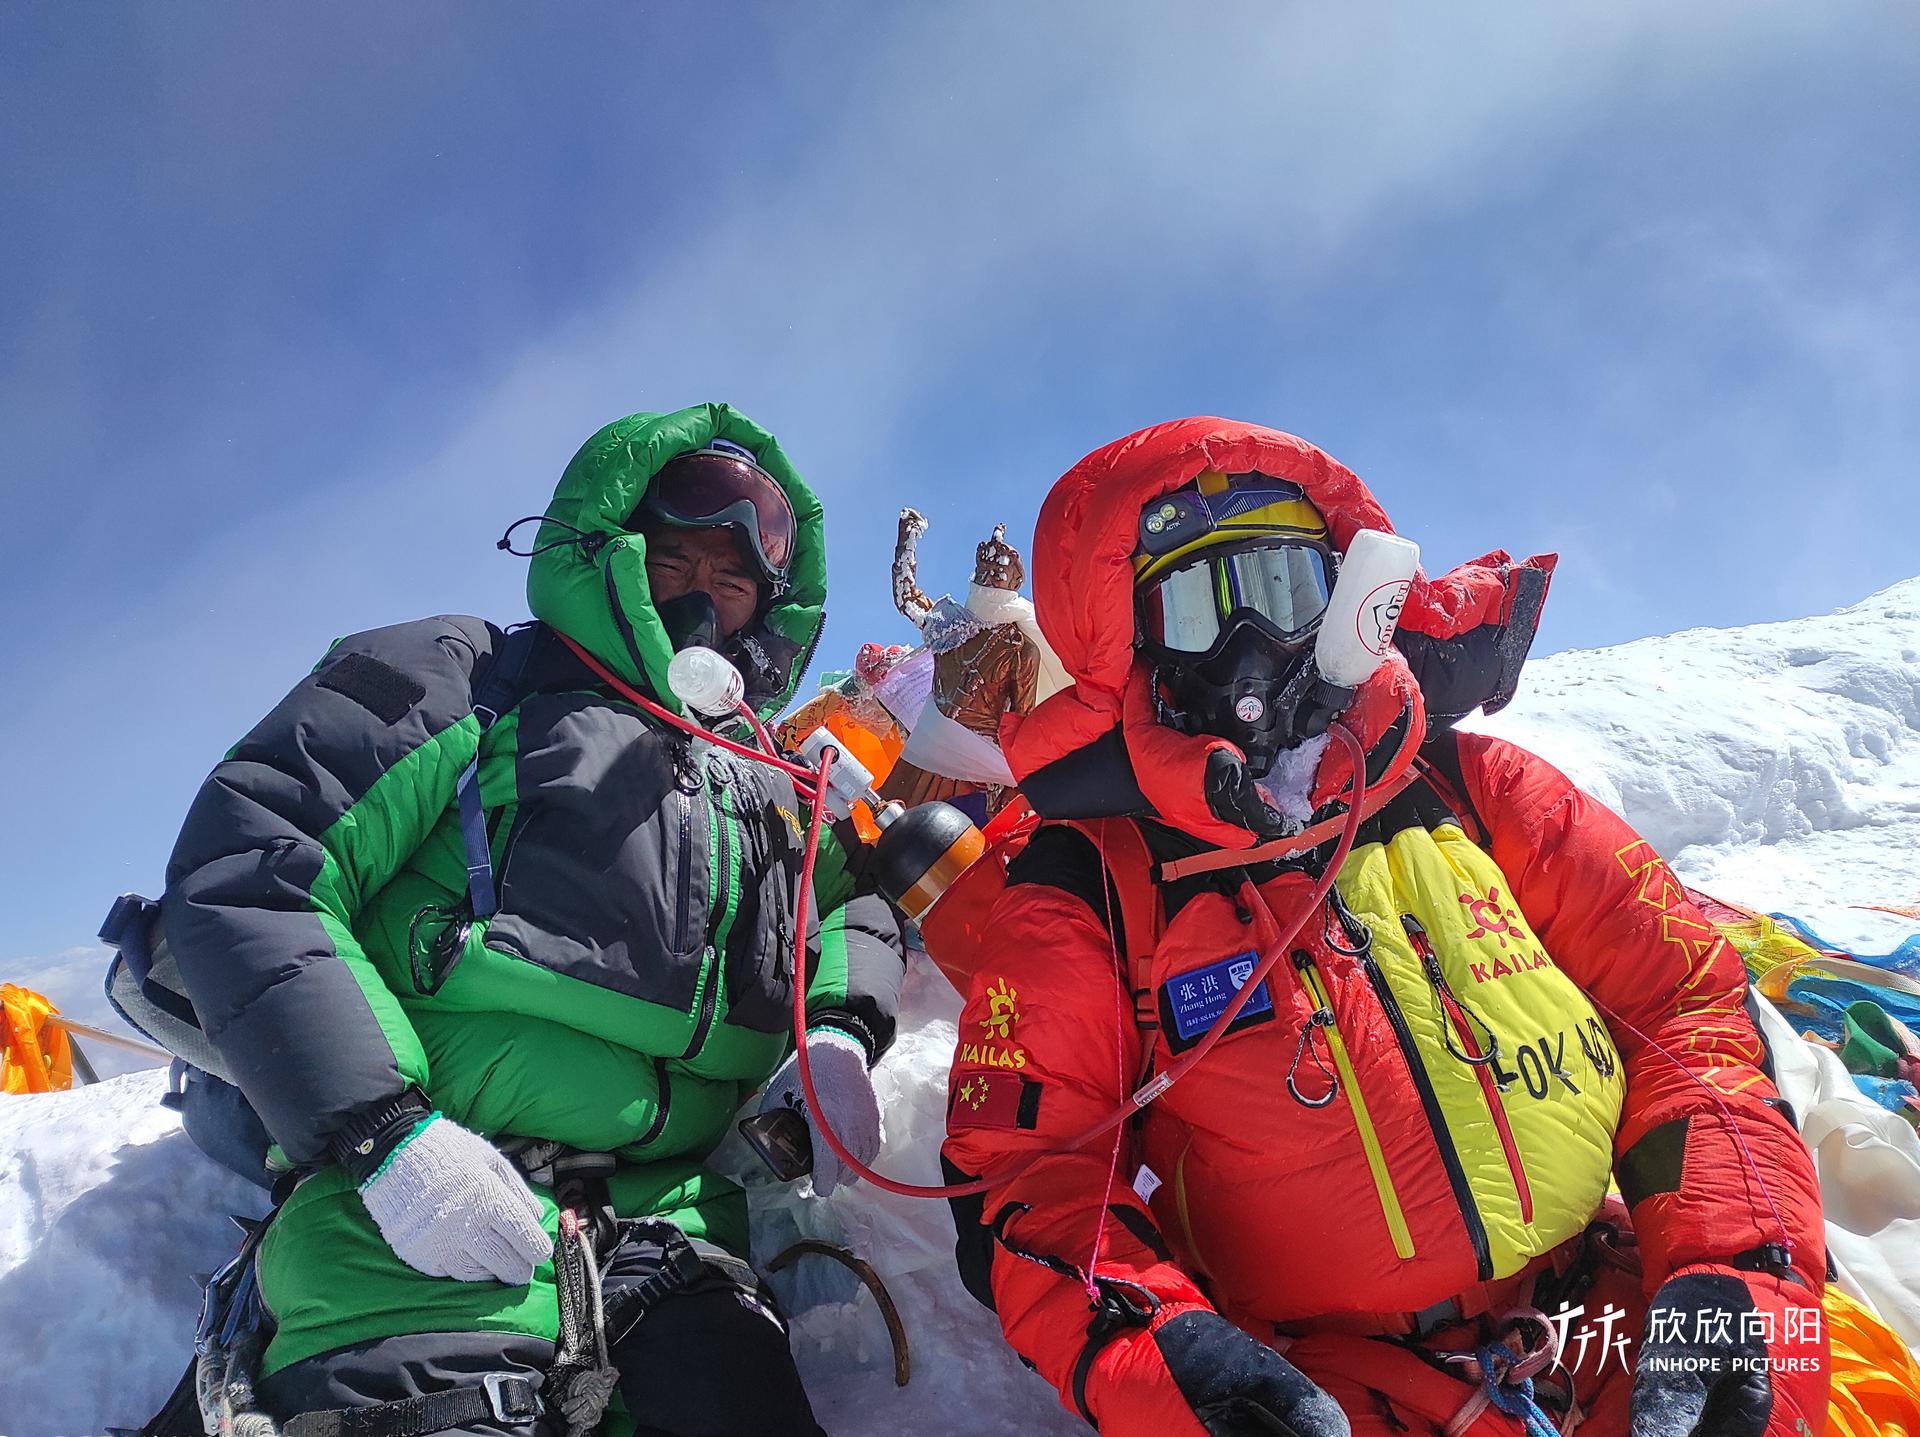 Two men wearing green and red coats stand amid a snowy Mount everest